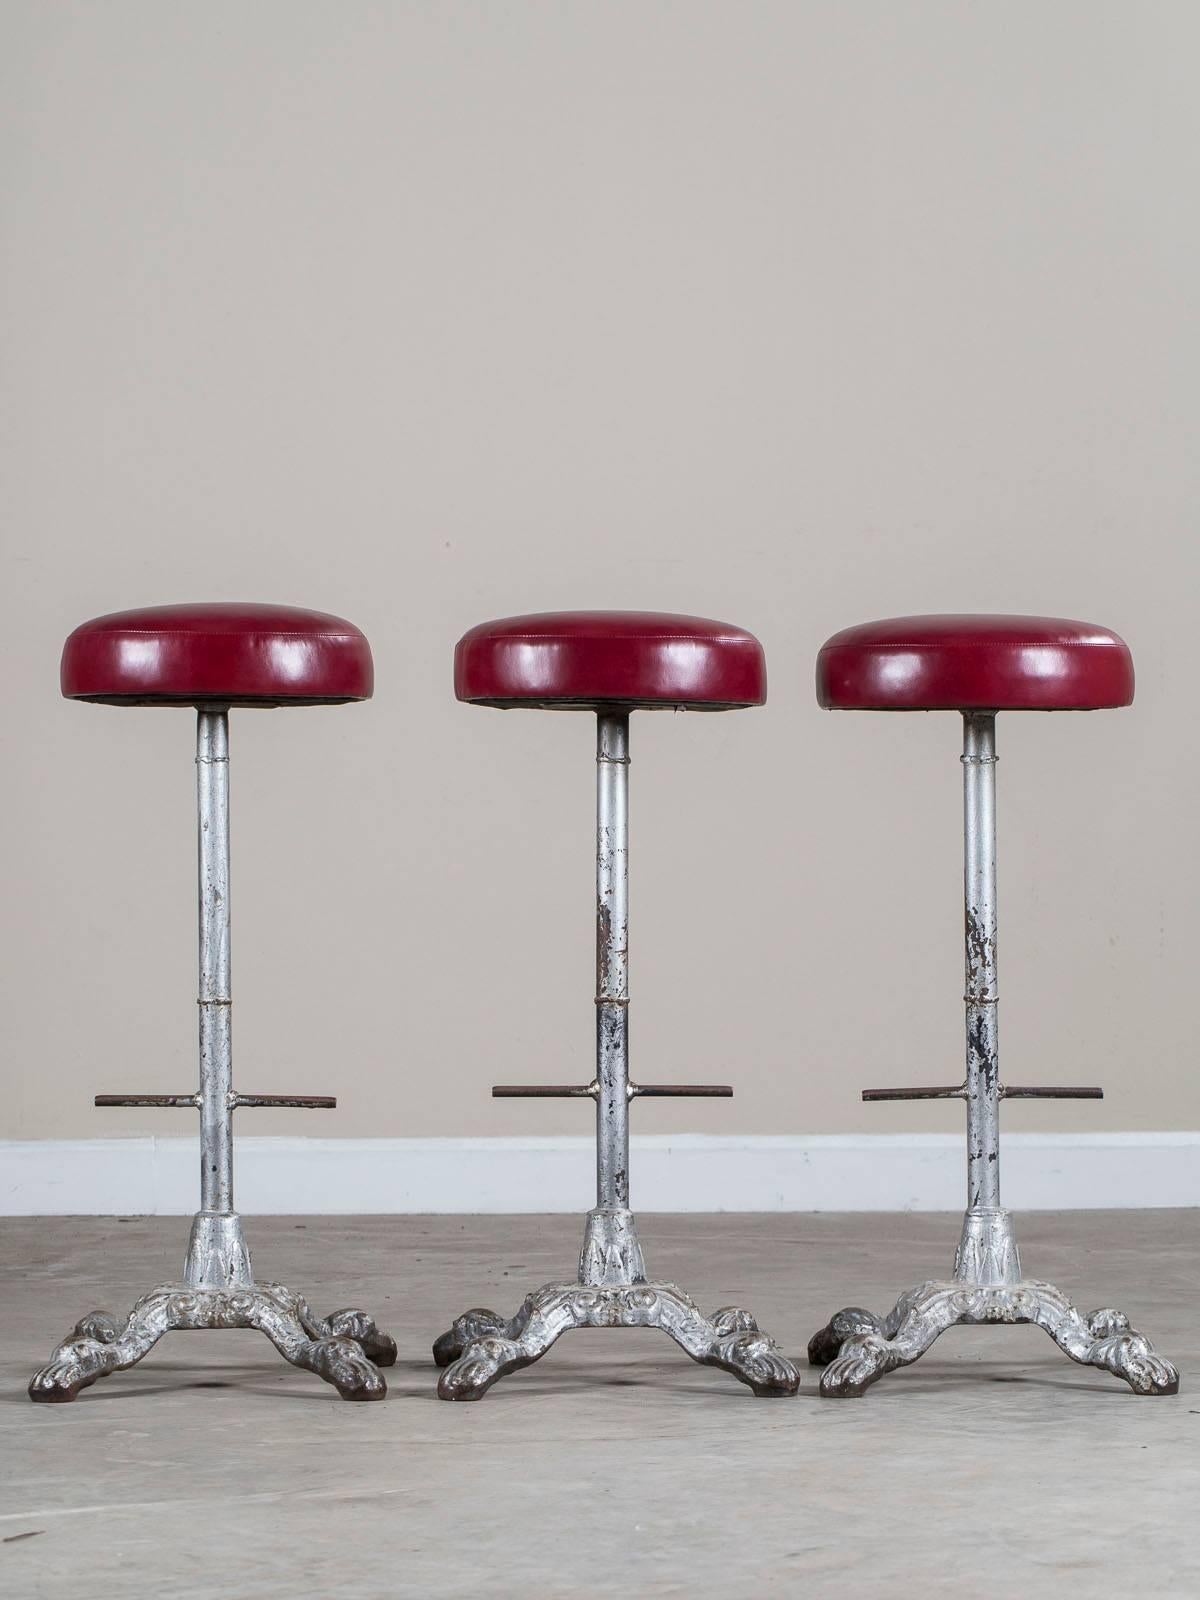 Three vintage English cast iron stools from England, circa 1895. These counter height stools retain their original painted finish that shows the passage of time. The use of cast iron that originated in the nineteenth century literally changed the